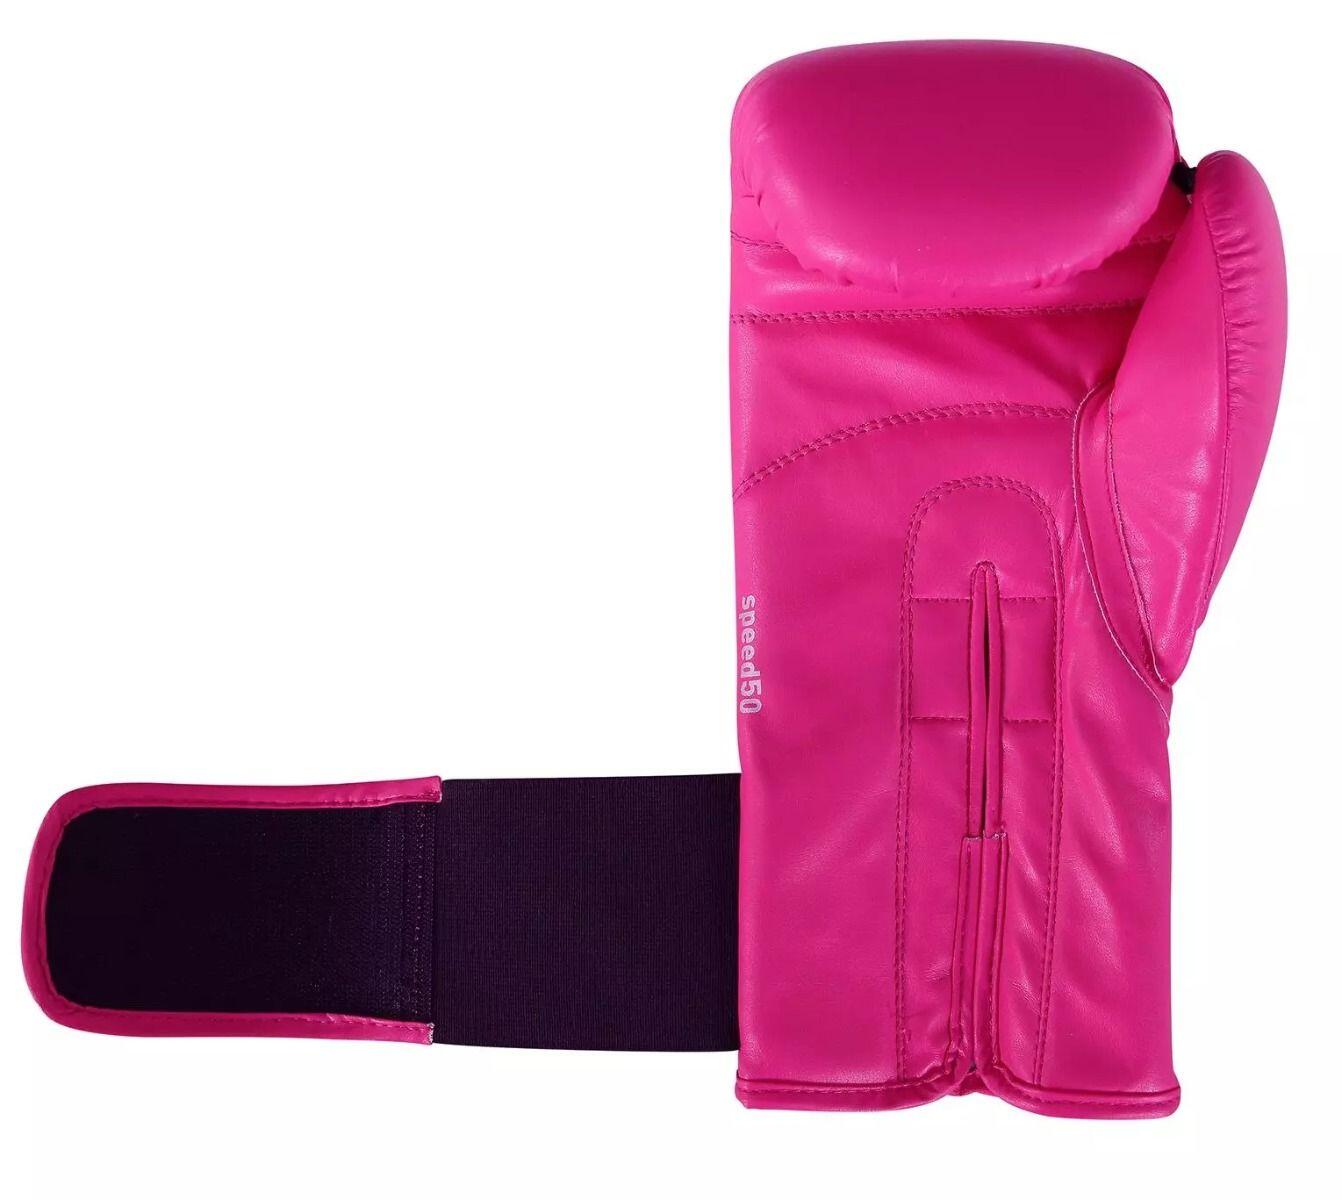 Adidas Speed 50 Boxing Gloves 7/7